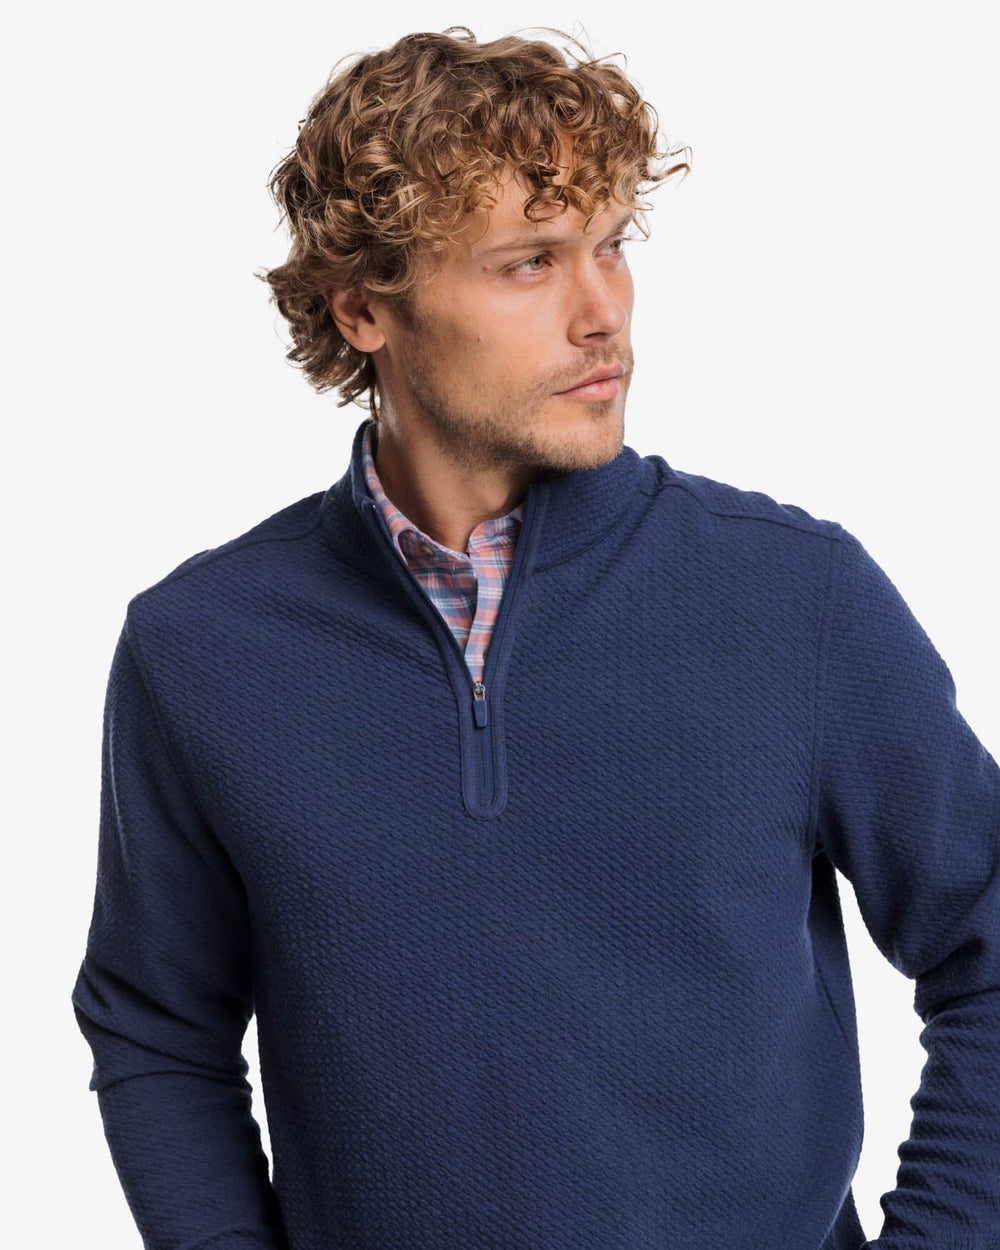 The front view of the Southern Tide Heather Outbound Quarter Zip by Southern Tide - Heather True Navy